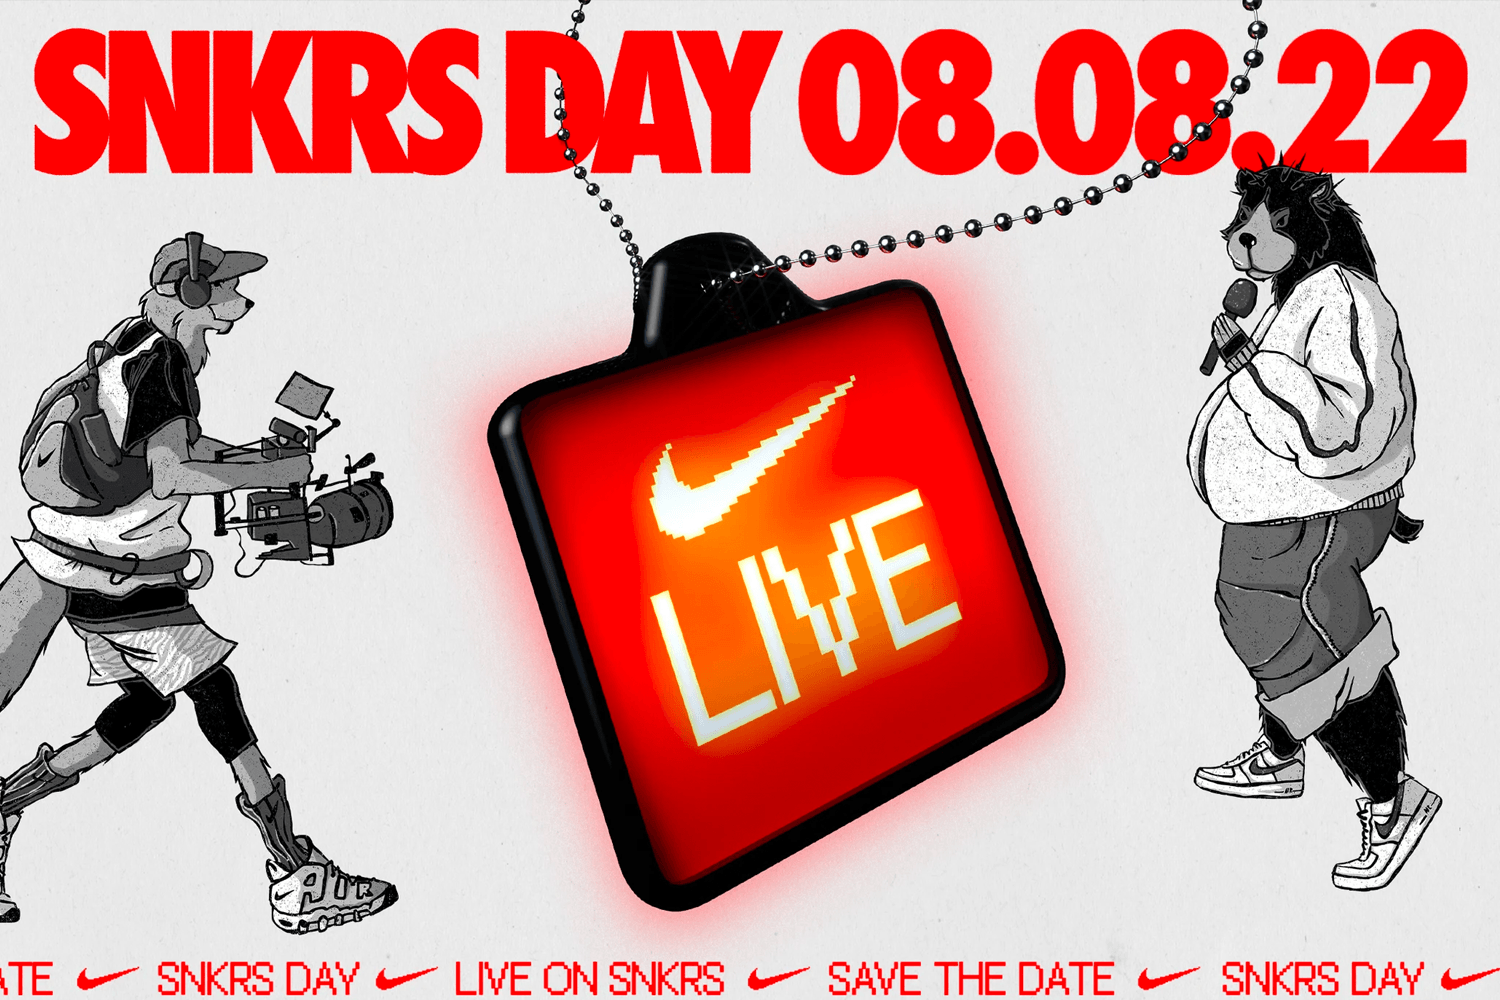 The second sneaker release on Nike SNKRS Day announced